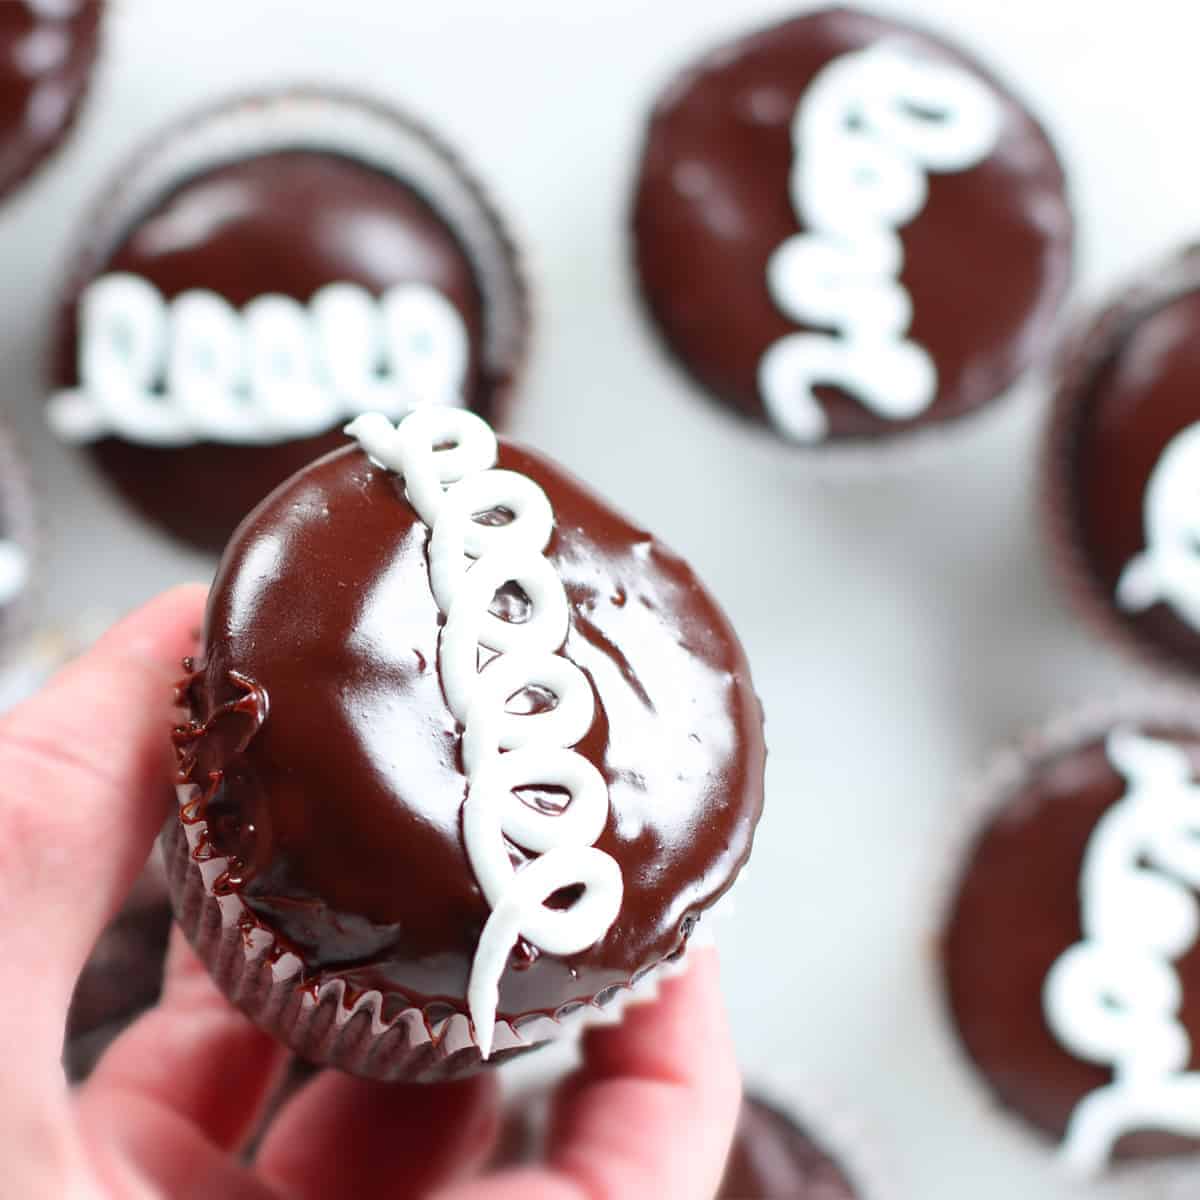 homemade hostess cupcakes with frosting.